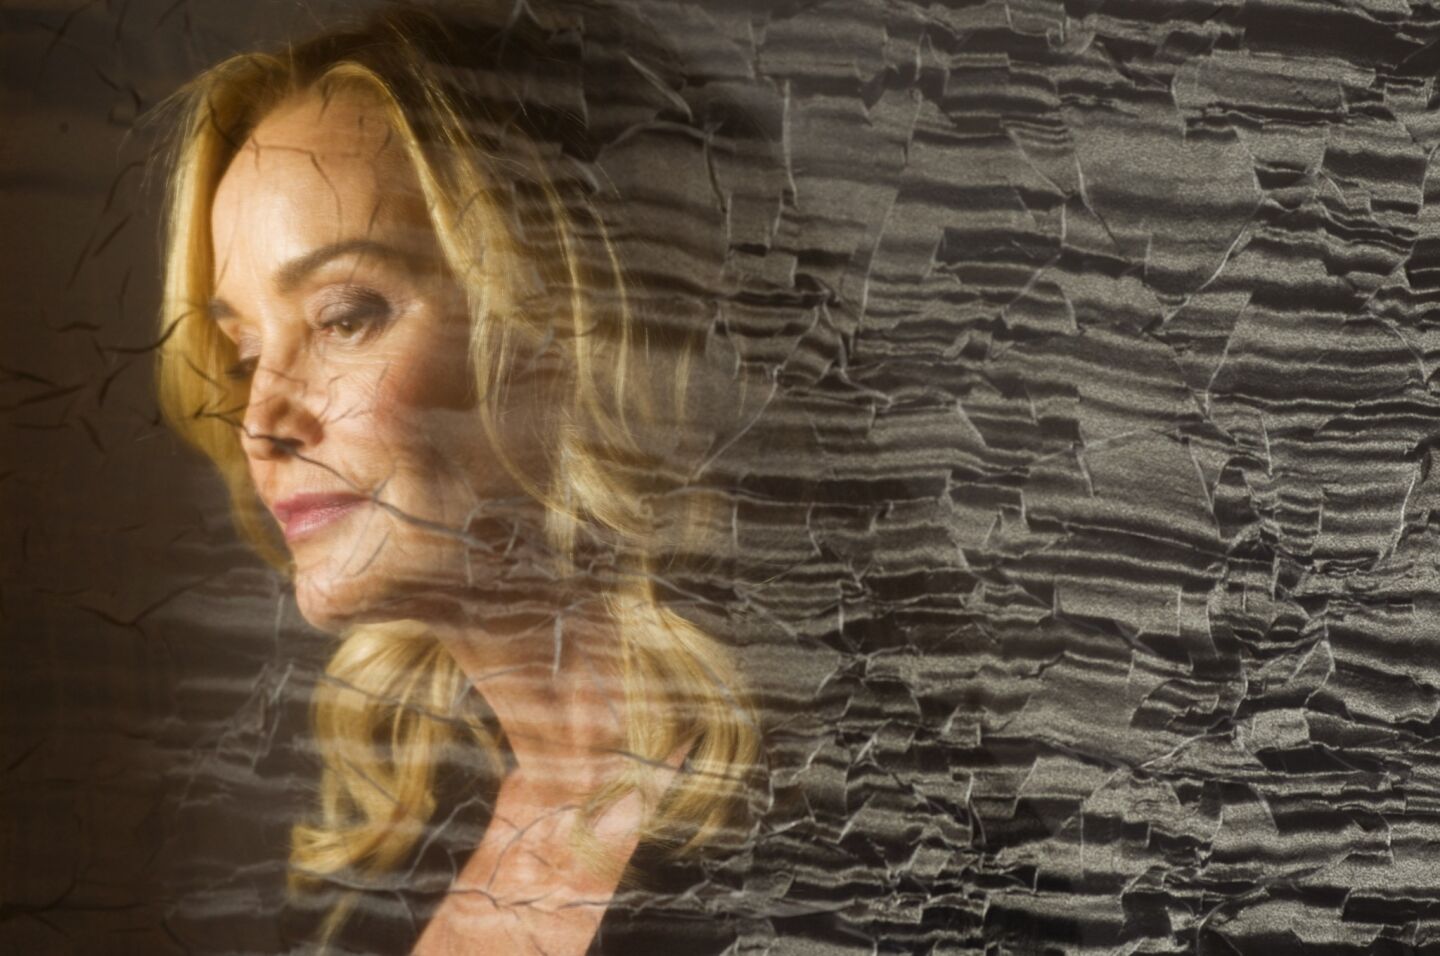 Jessica Lange, seen through a filmy veil, credits "American Horror Story" co-creator Ryan Murphy with luring her onto the show.